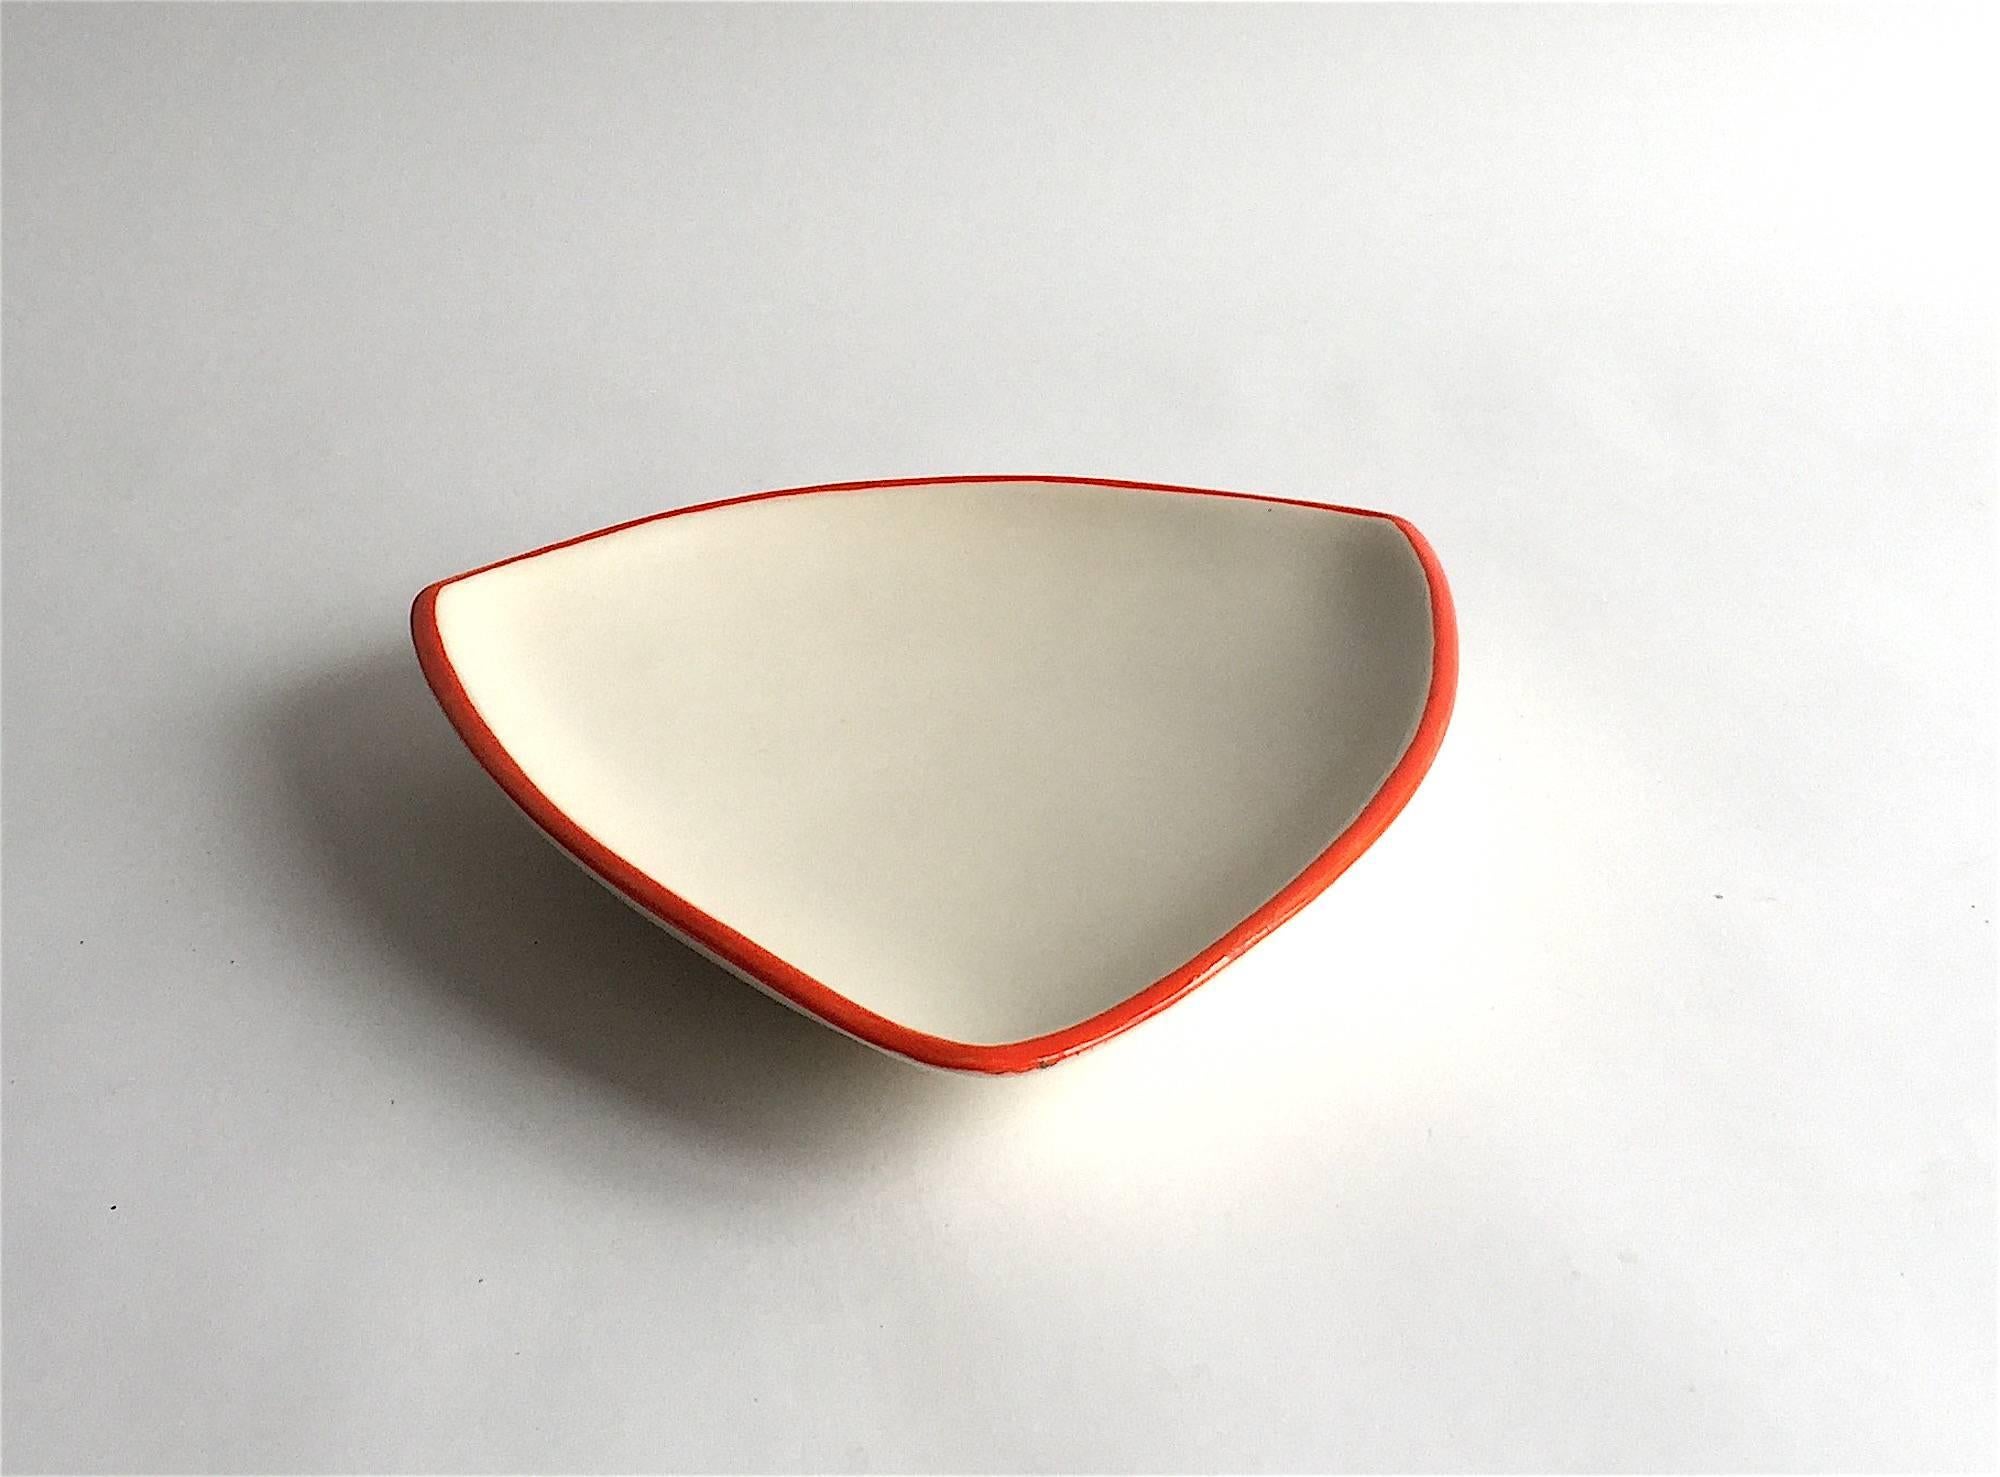 Denise Gatard (1927-1992).

This larger shell/ flat bowl is matte white on the inside and outside with an orange red line on the outer rim.

Denise Gatard: Sister of Georges Jouve was using strong organic shapes, too, but with delicate and fresh